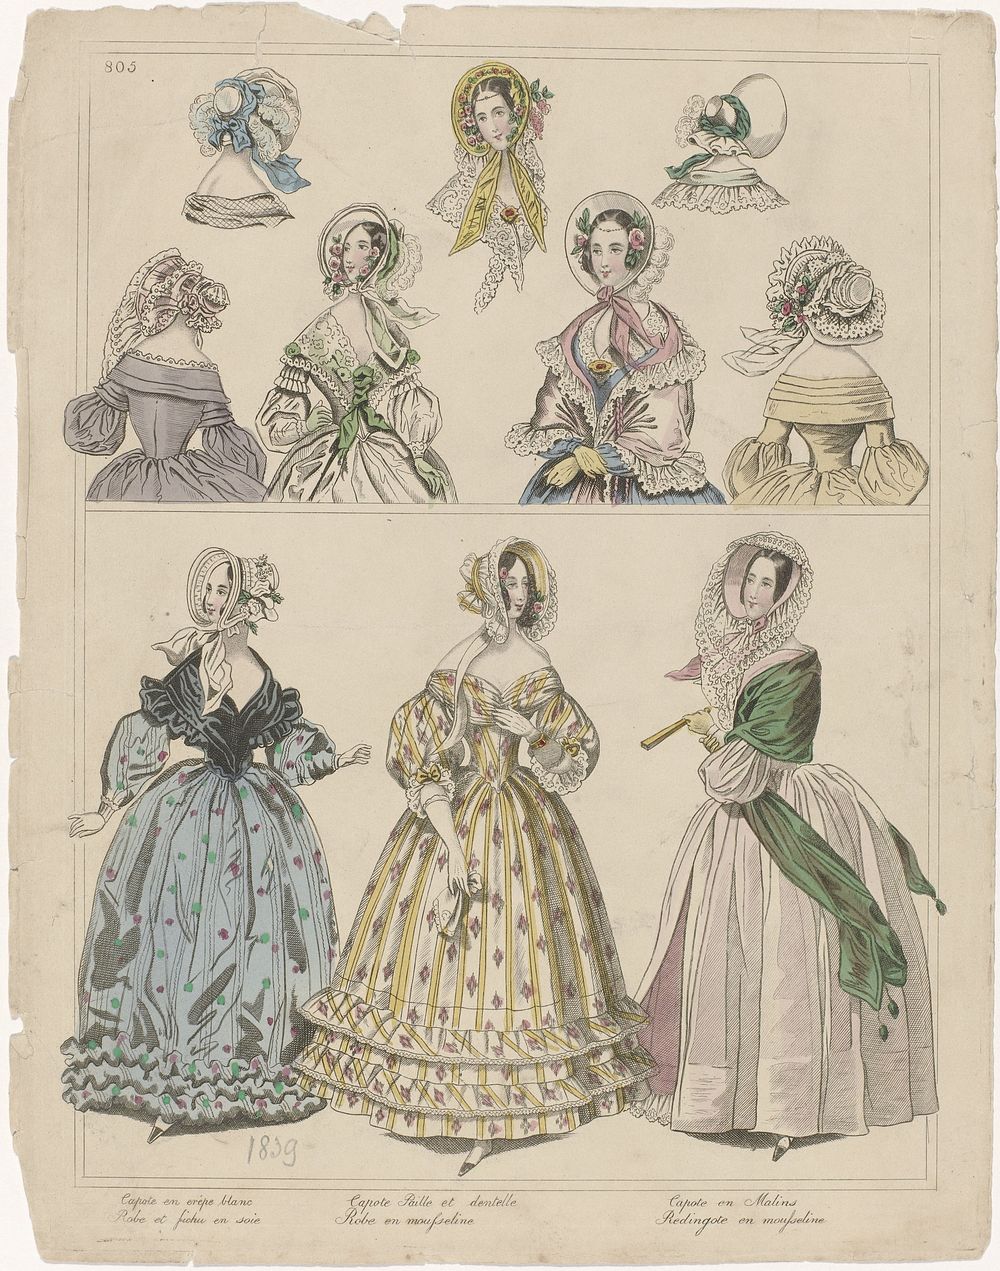 Townsend's Monthly Selection of Parisian Costumes, 1839, No. 805 : Capote en crêp (...) (1839) by anonymous and Henry James…